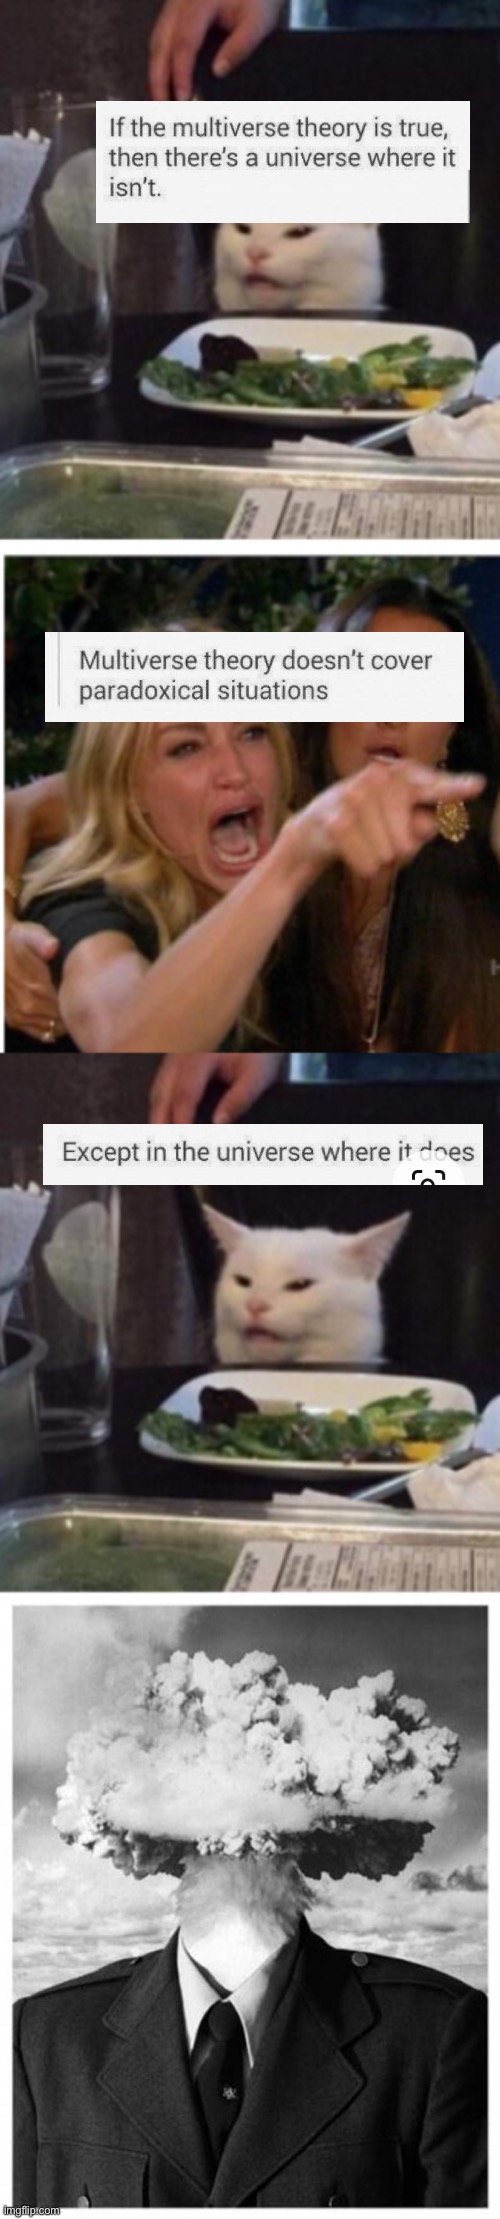 Wut ? | image tagged in mindblown,conspiracy theory,woman yelling at cat,grumpy cat,cats,kittens | made w/ Imgflip meme maker